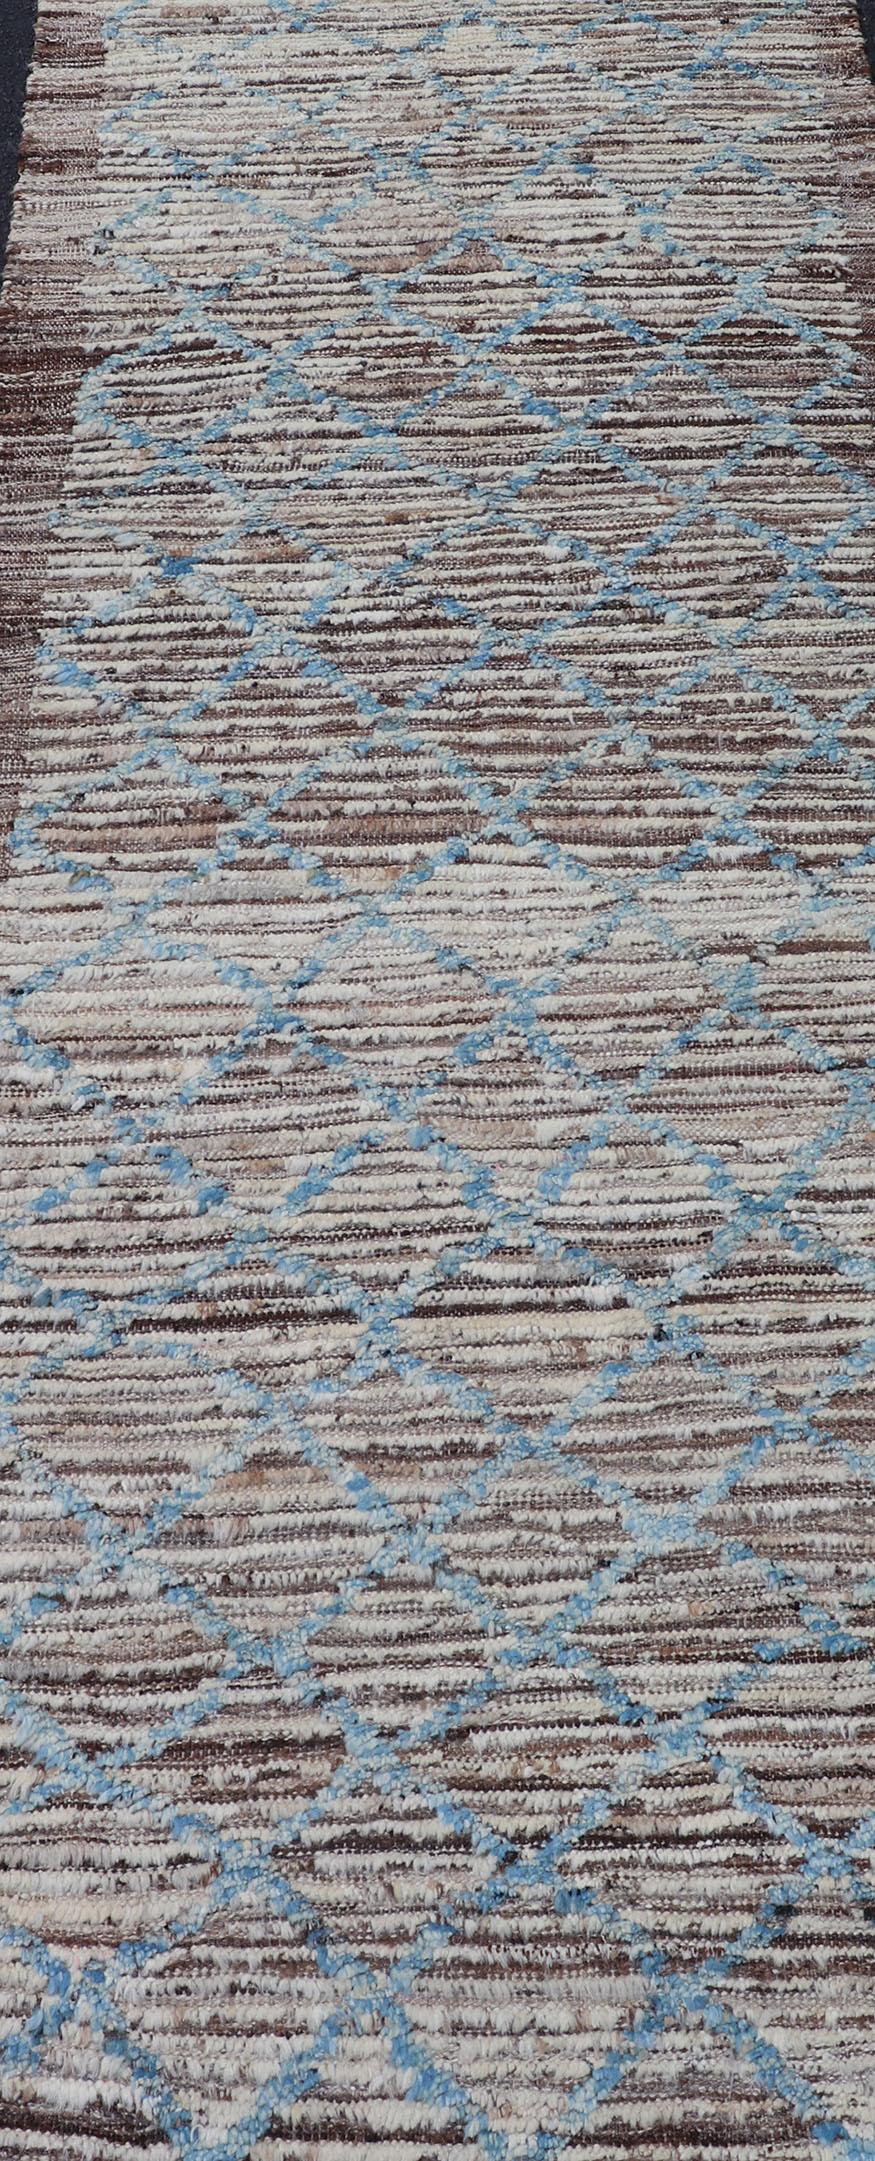 Wool Modern Runner in All-Over Design in Cream, Sky Blue Color on a Brown Background For Sale